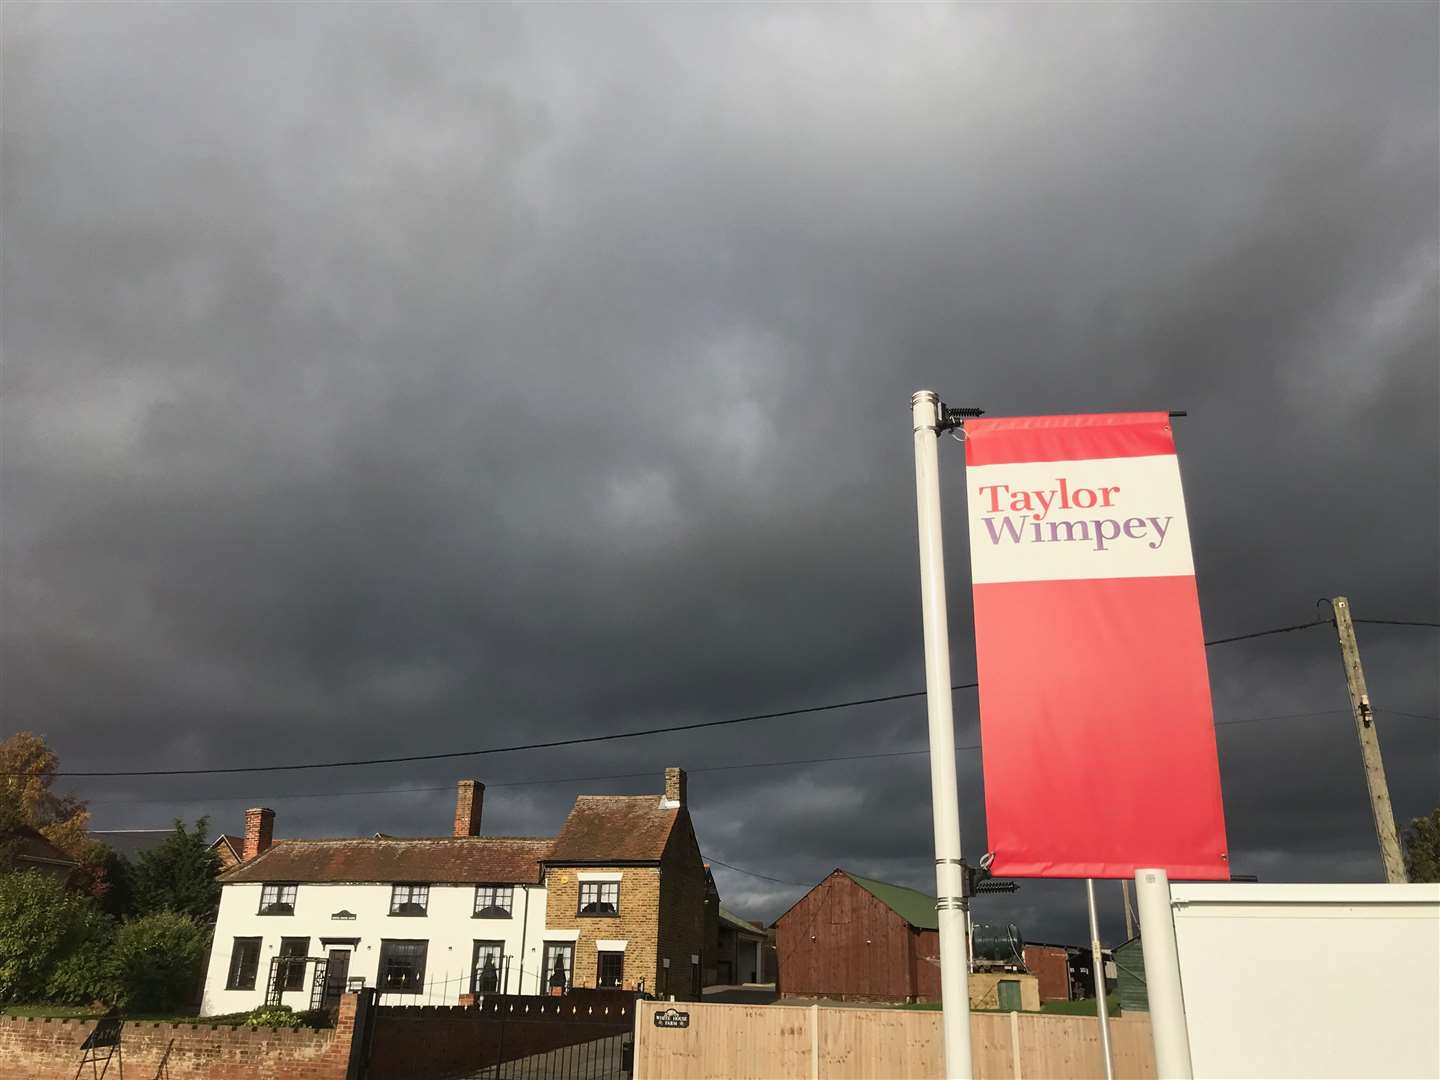 Dark clouds over a Taylor Wimpey banner in Hoo